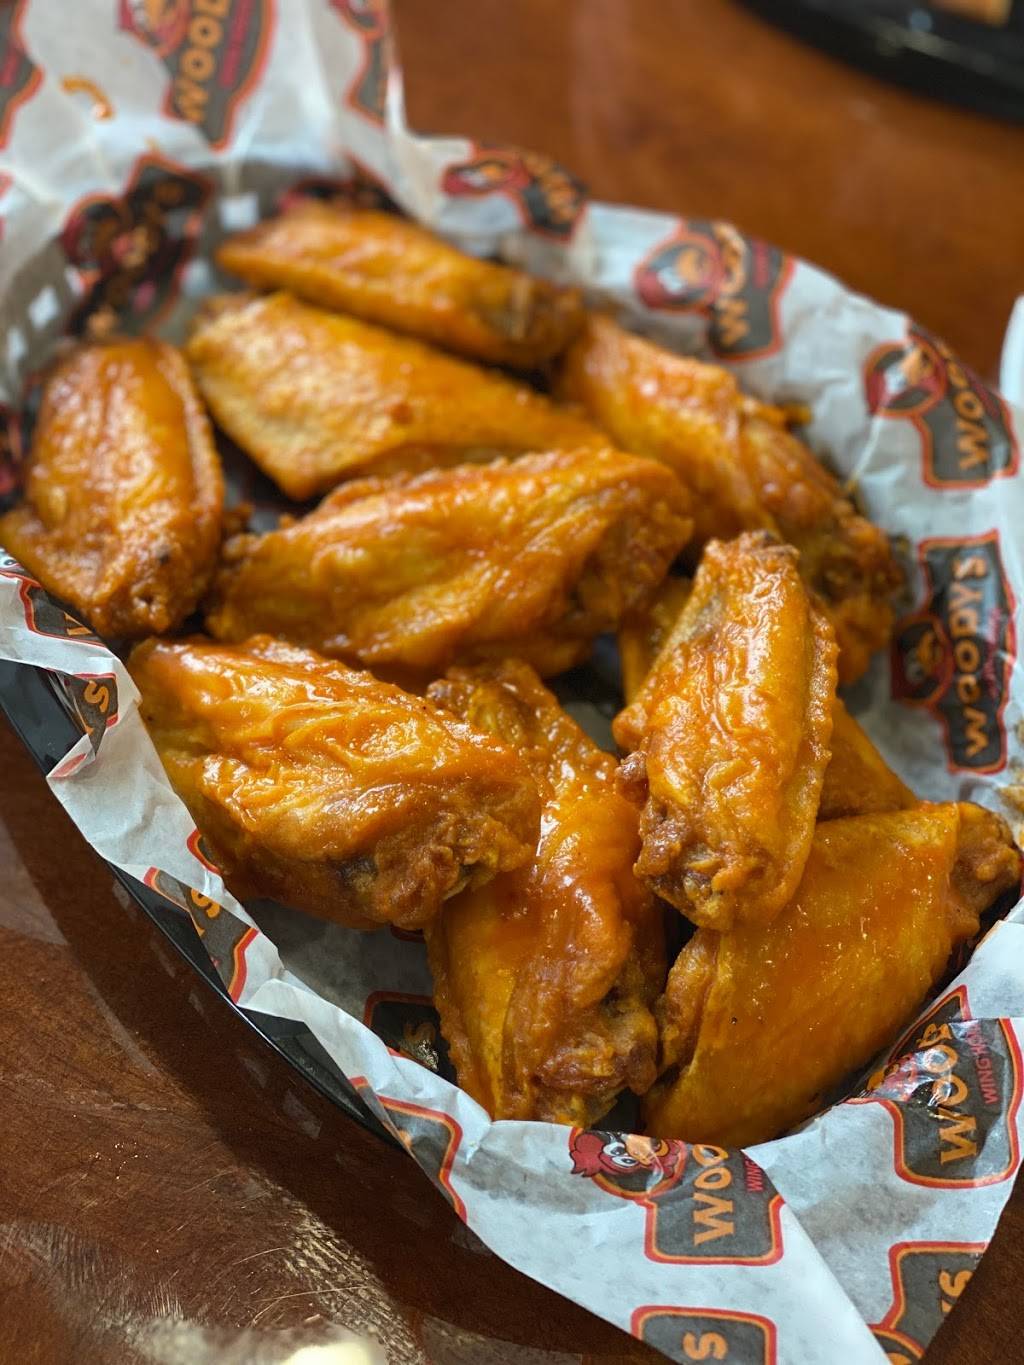 Woodys Wing House | 1840 Hilliard Rome Rd, Hilliard, OH 43026 | Phone: (614) 777-1818